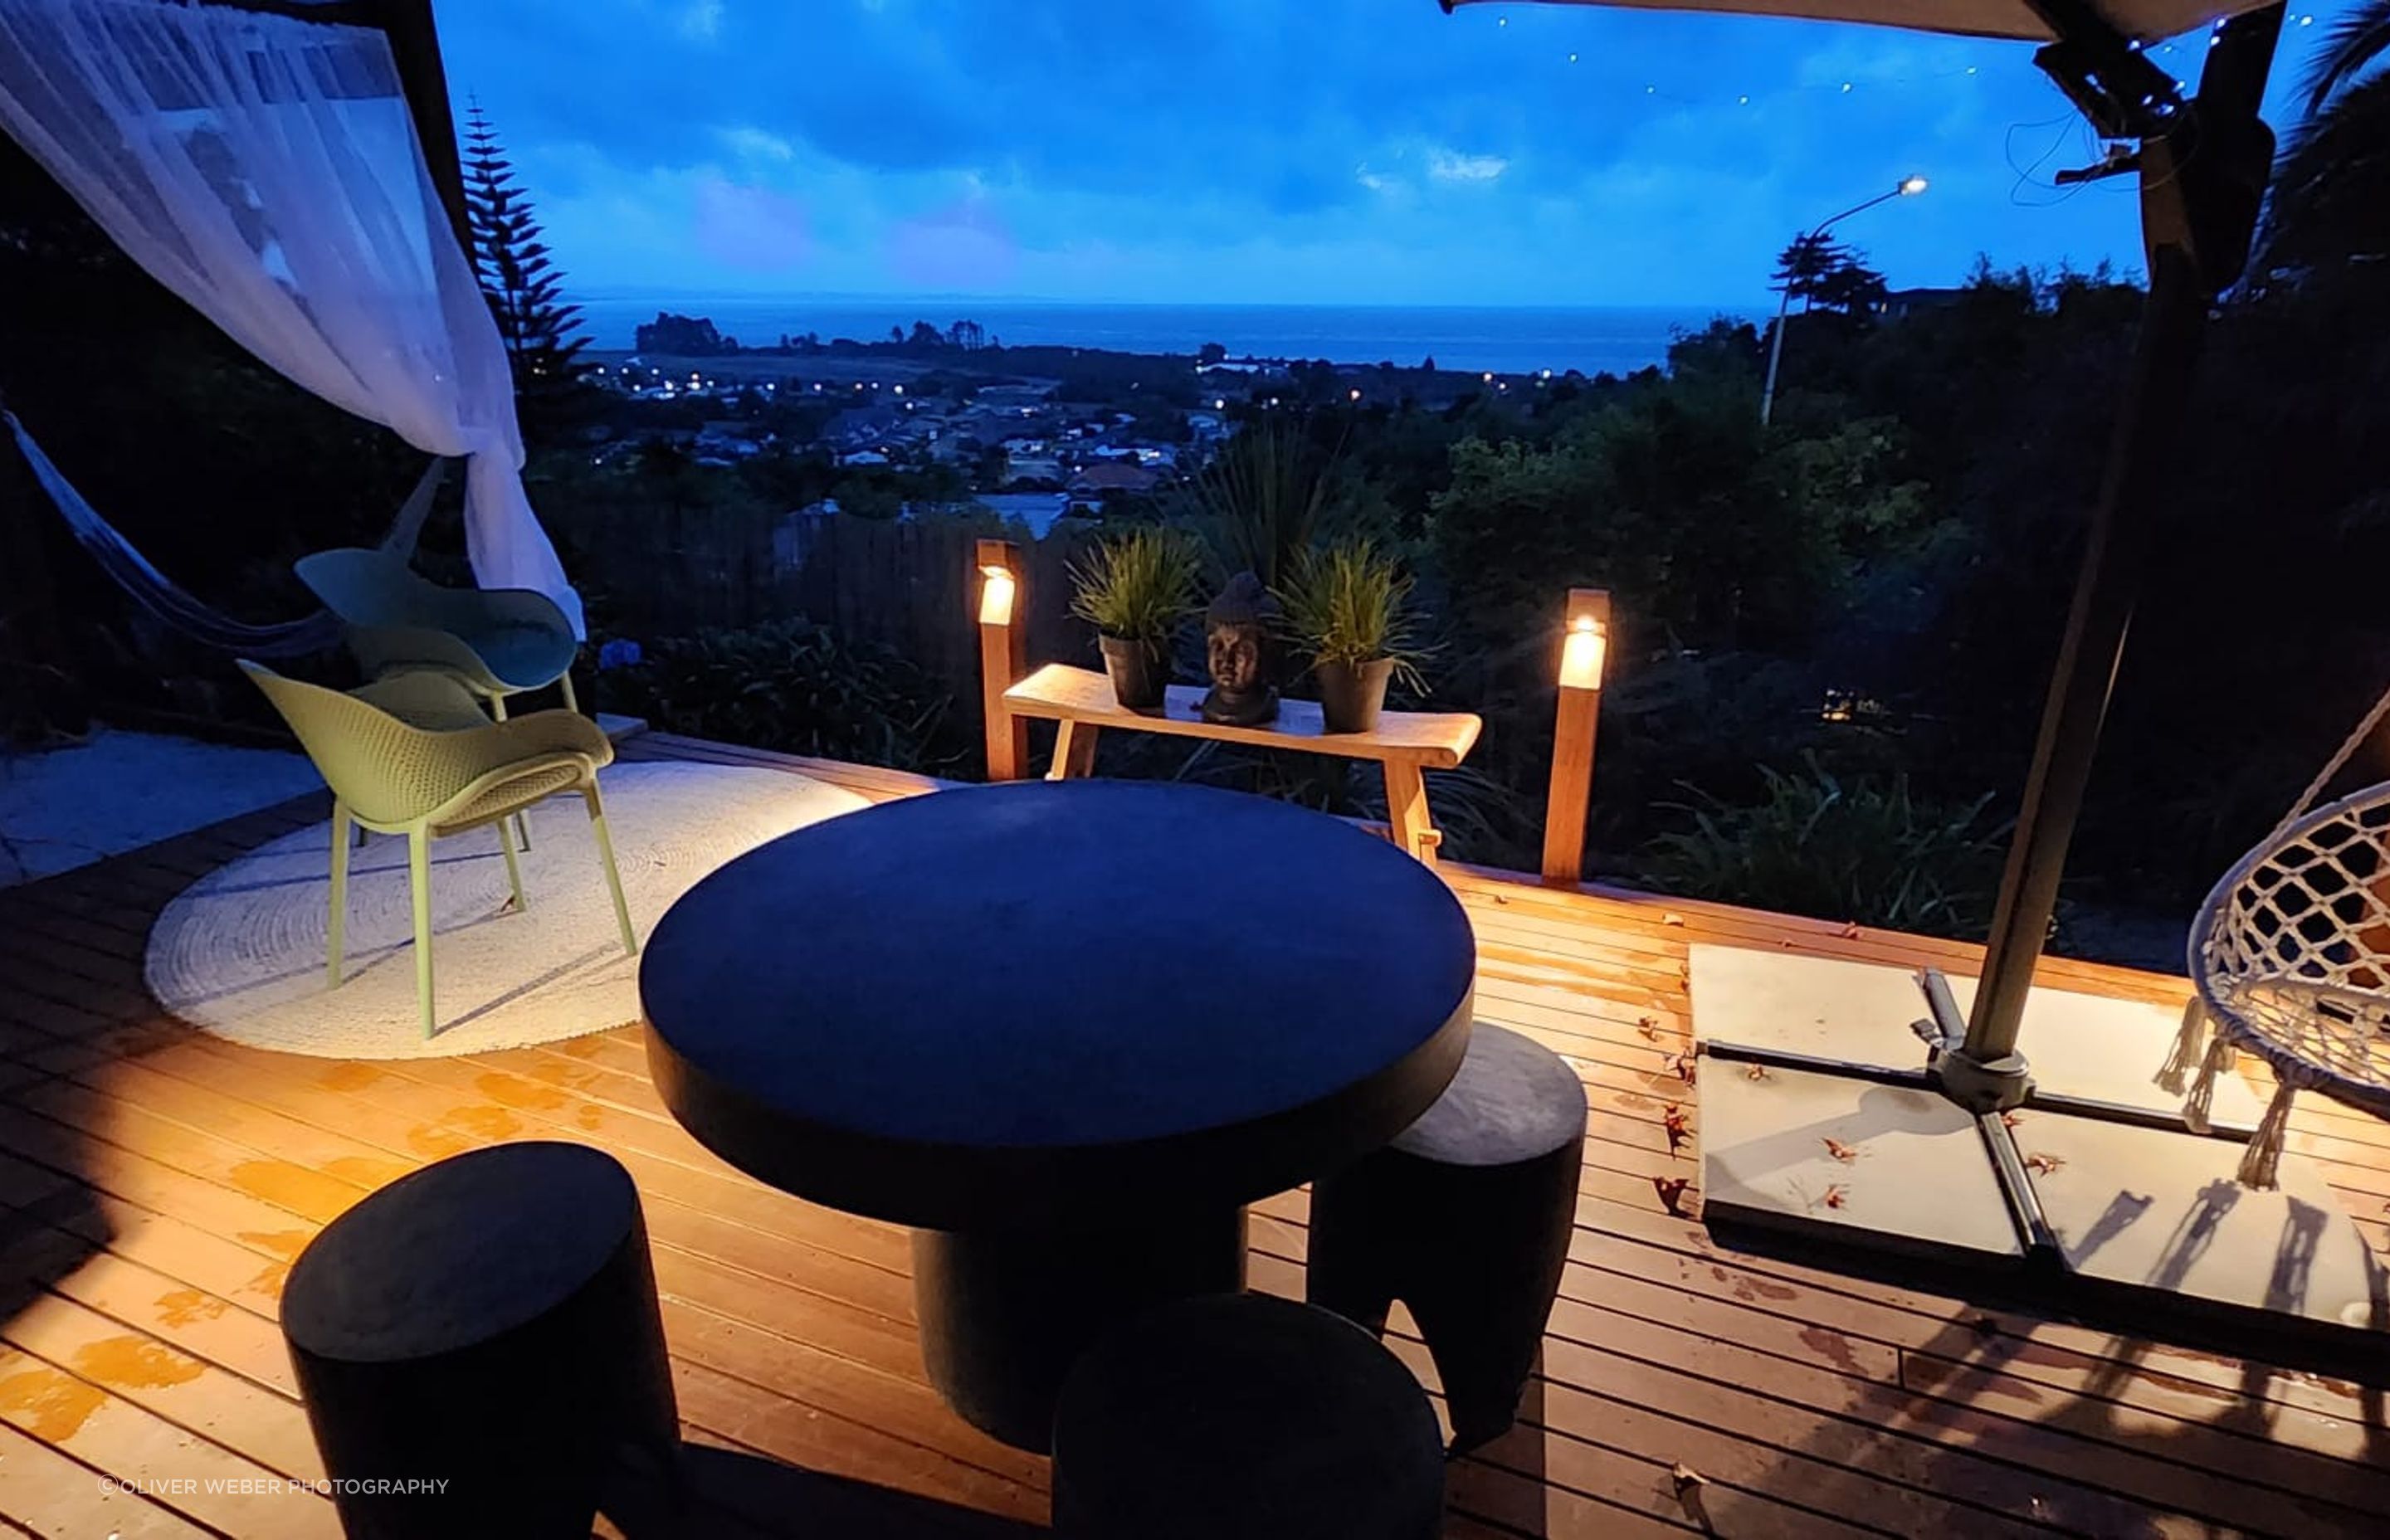 The outdoor entertainment area is beautifully illuminated with Switch Lighting’s new range of Bollards. Product: Switch Lighting Pillar Light 2 SLBL120F Corner and Straight variants.